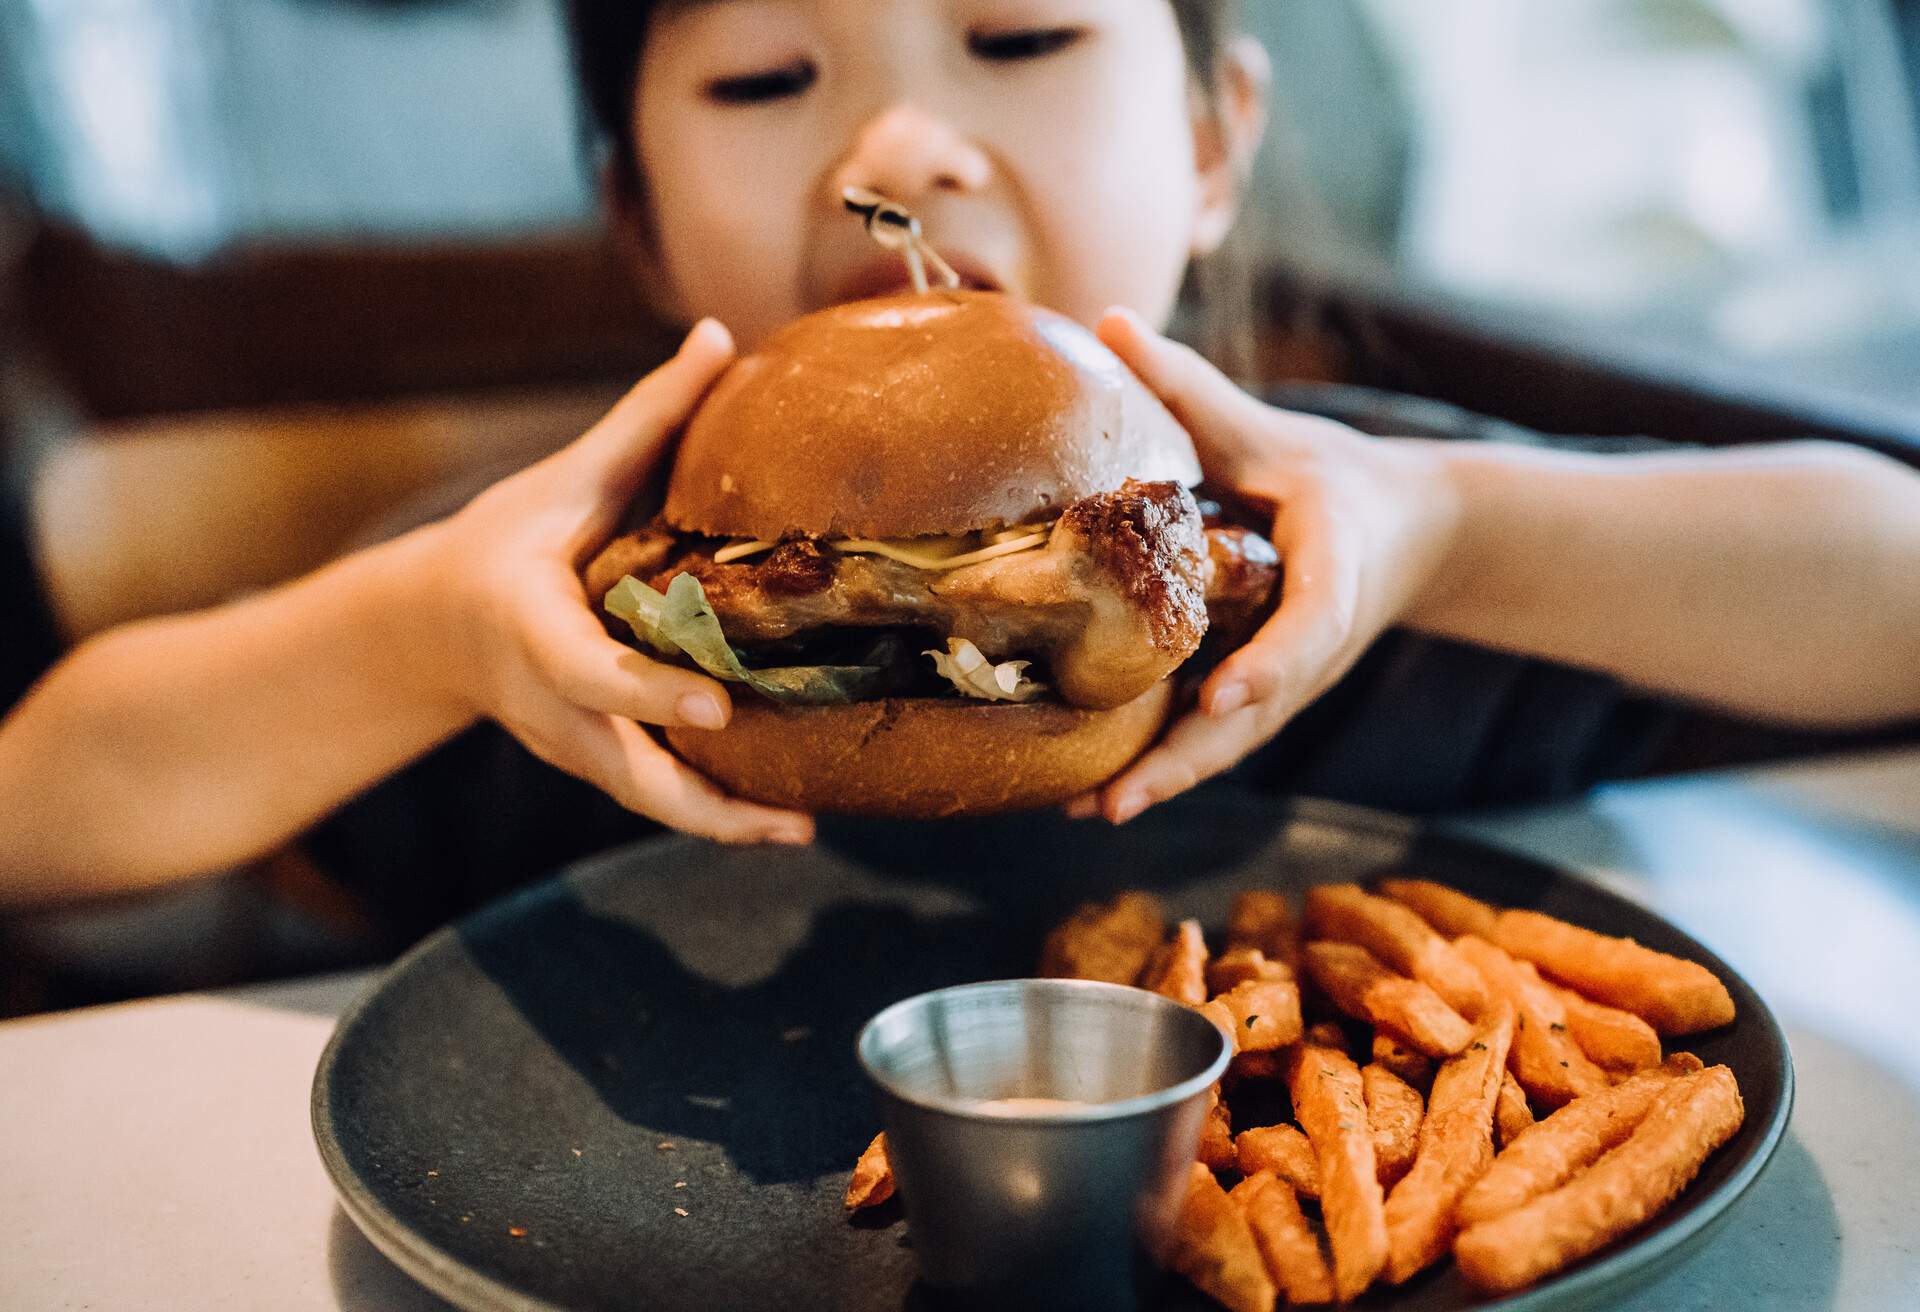 Close up shot of lovely little Asian girl enjoying eating a big burger with sweet potato fries in a restaurant. Eating out lifestyle